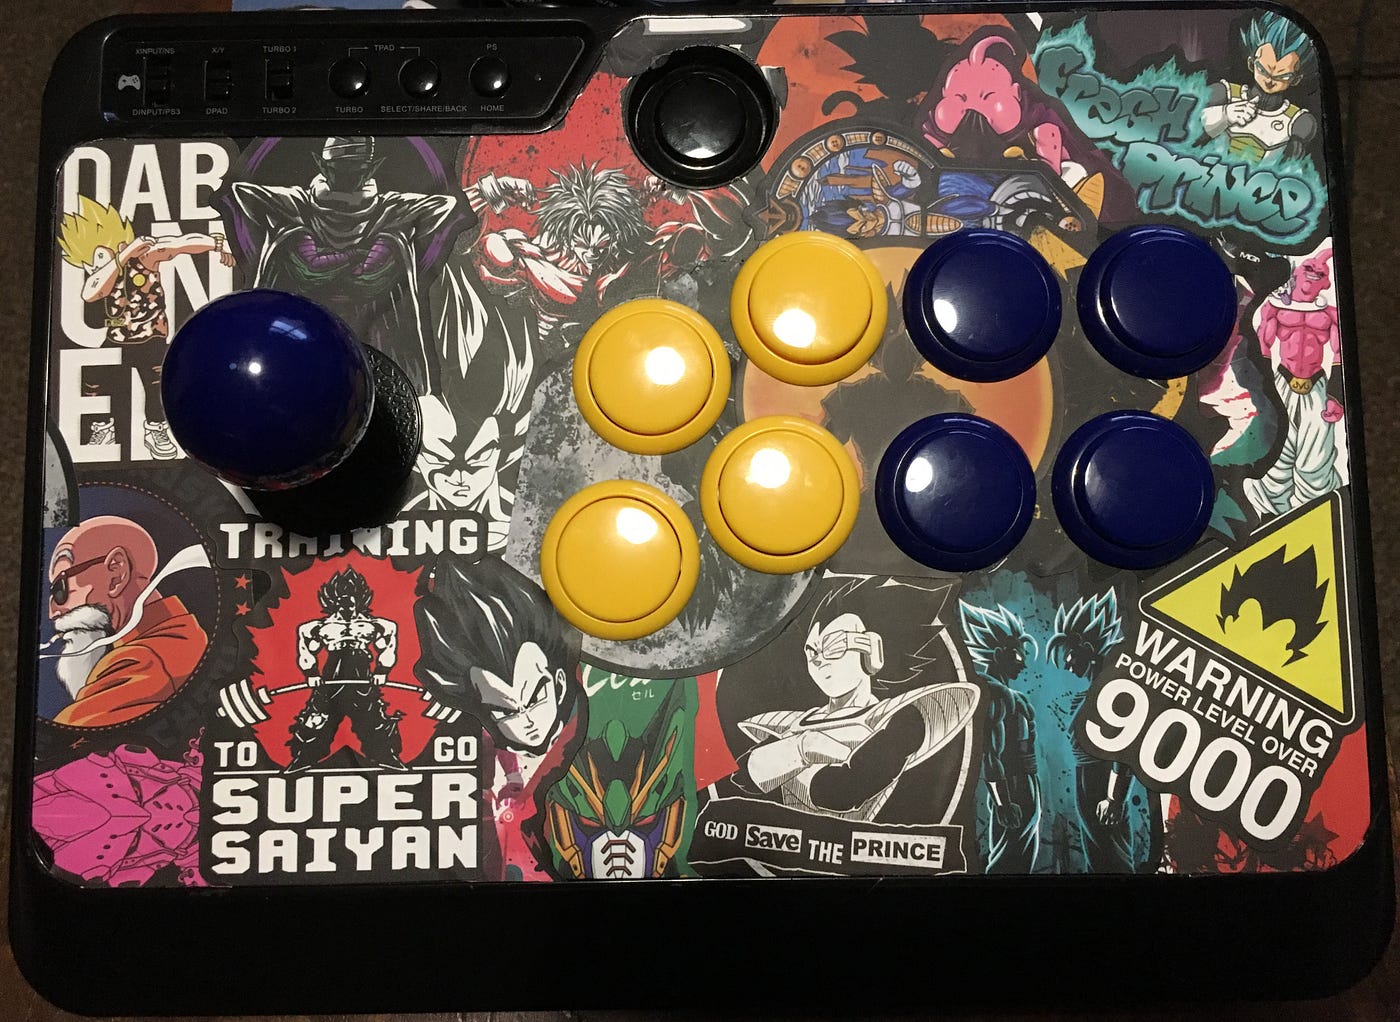 Fight Stick Modding Is Easy When You Know How